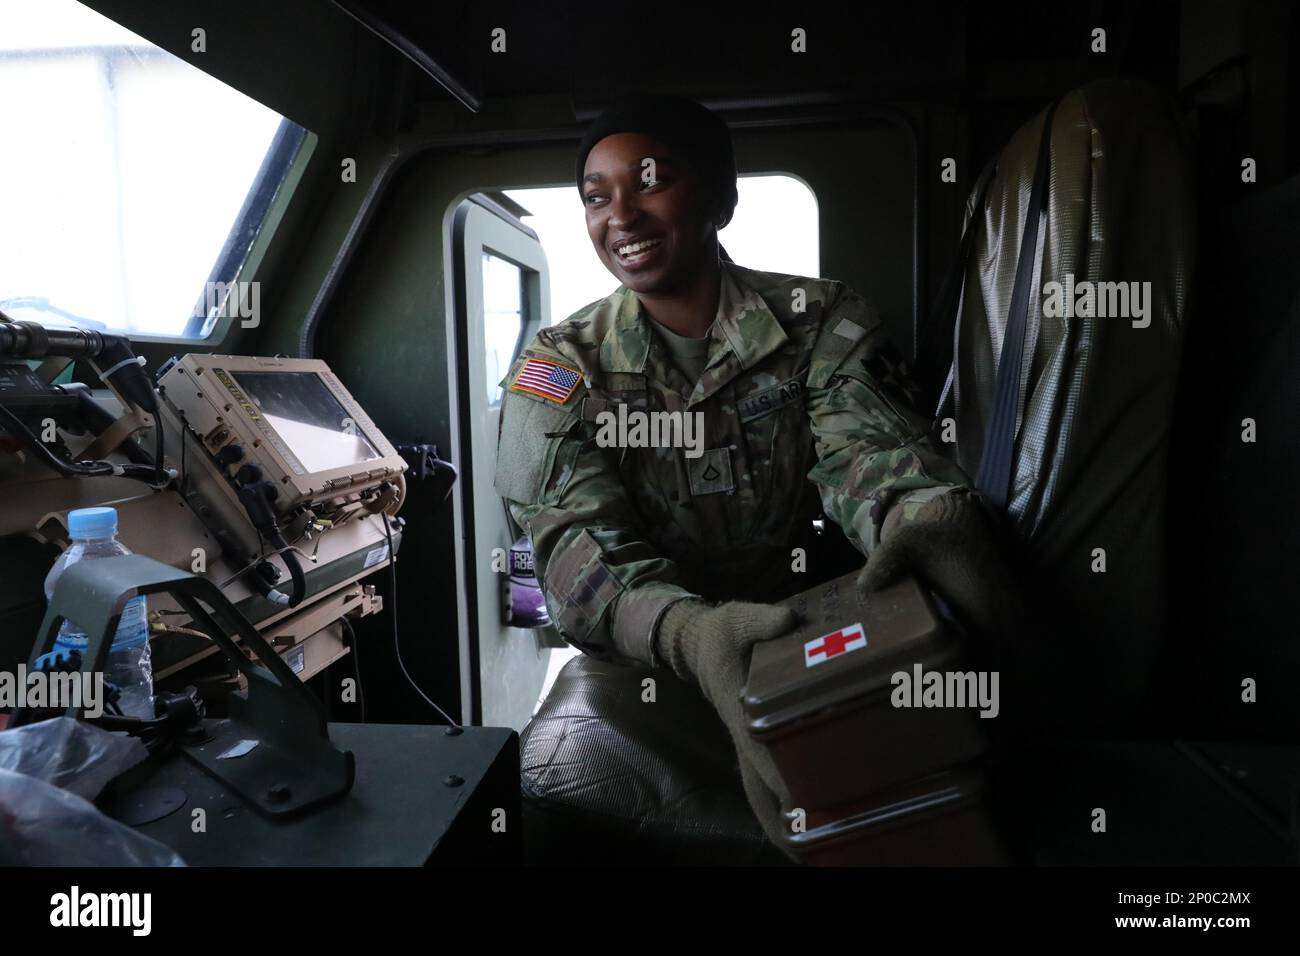 February is Black History Month and we asked our Soldiers 'Why is diversity important in the U.S. Army?'    “In the Army, diversity is important because it provides a sense of comfort and belonging for Soldiers of different races, ethnicities and cultures,' said Pfc. Deonna Terry, 88M Motor Transport Operator, E Company, 4th Battalion, 2nd Aviation Regiment, 2nd Combat Aviation Brigade, 2nd Infantry Division/ROK-U.S. Combined Division from Orlando, Florida. 'As an African American, seeing other African Americans in the military is very refreshing and fosters a sense of community. Having a dive Stock Photo